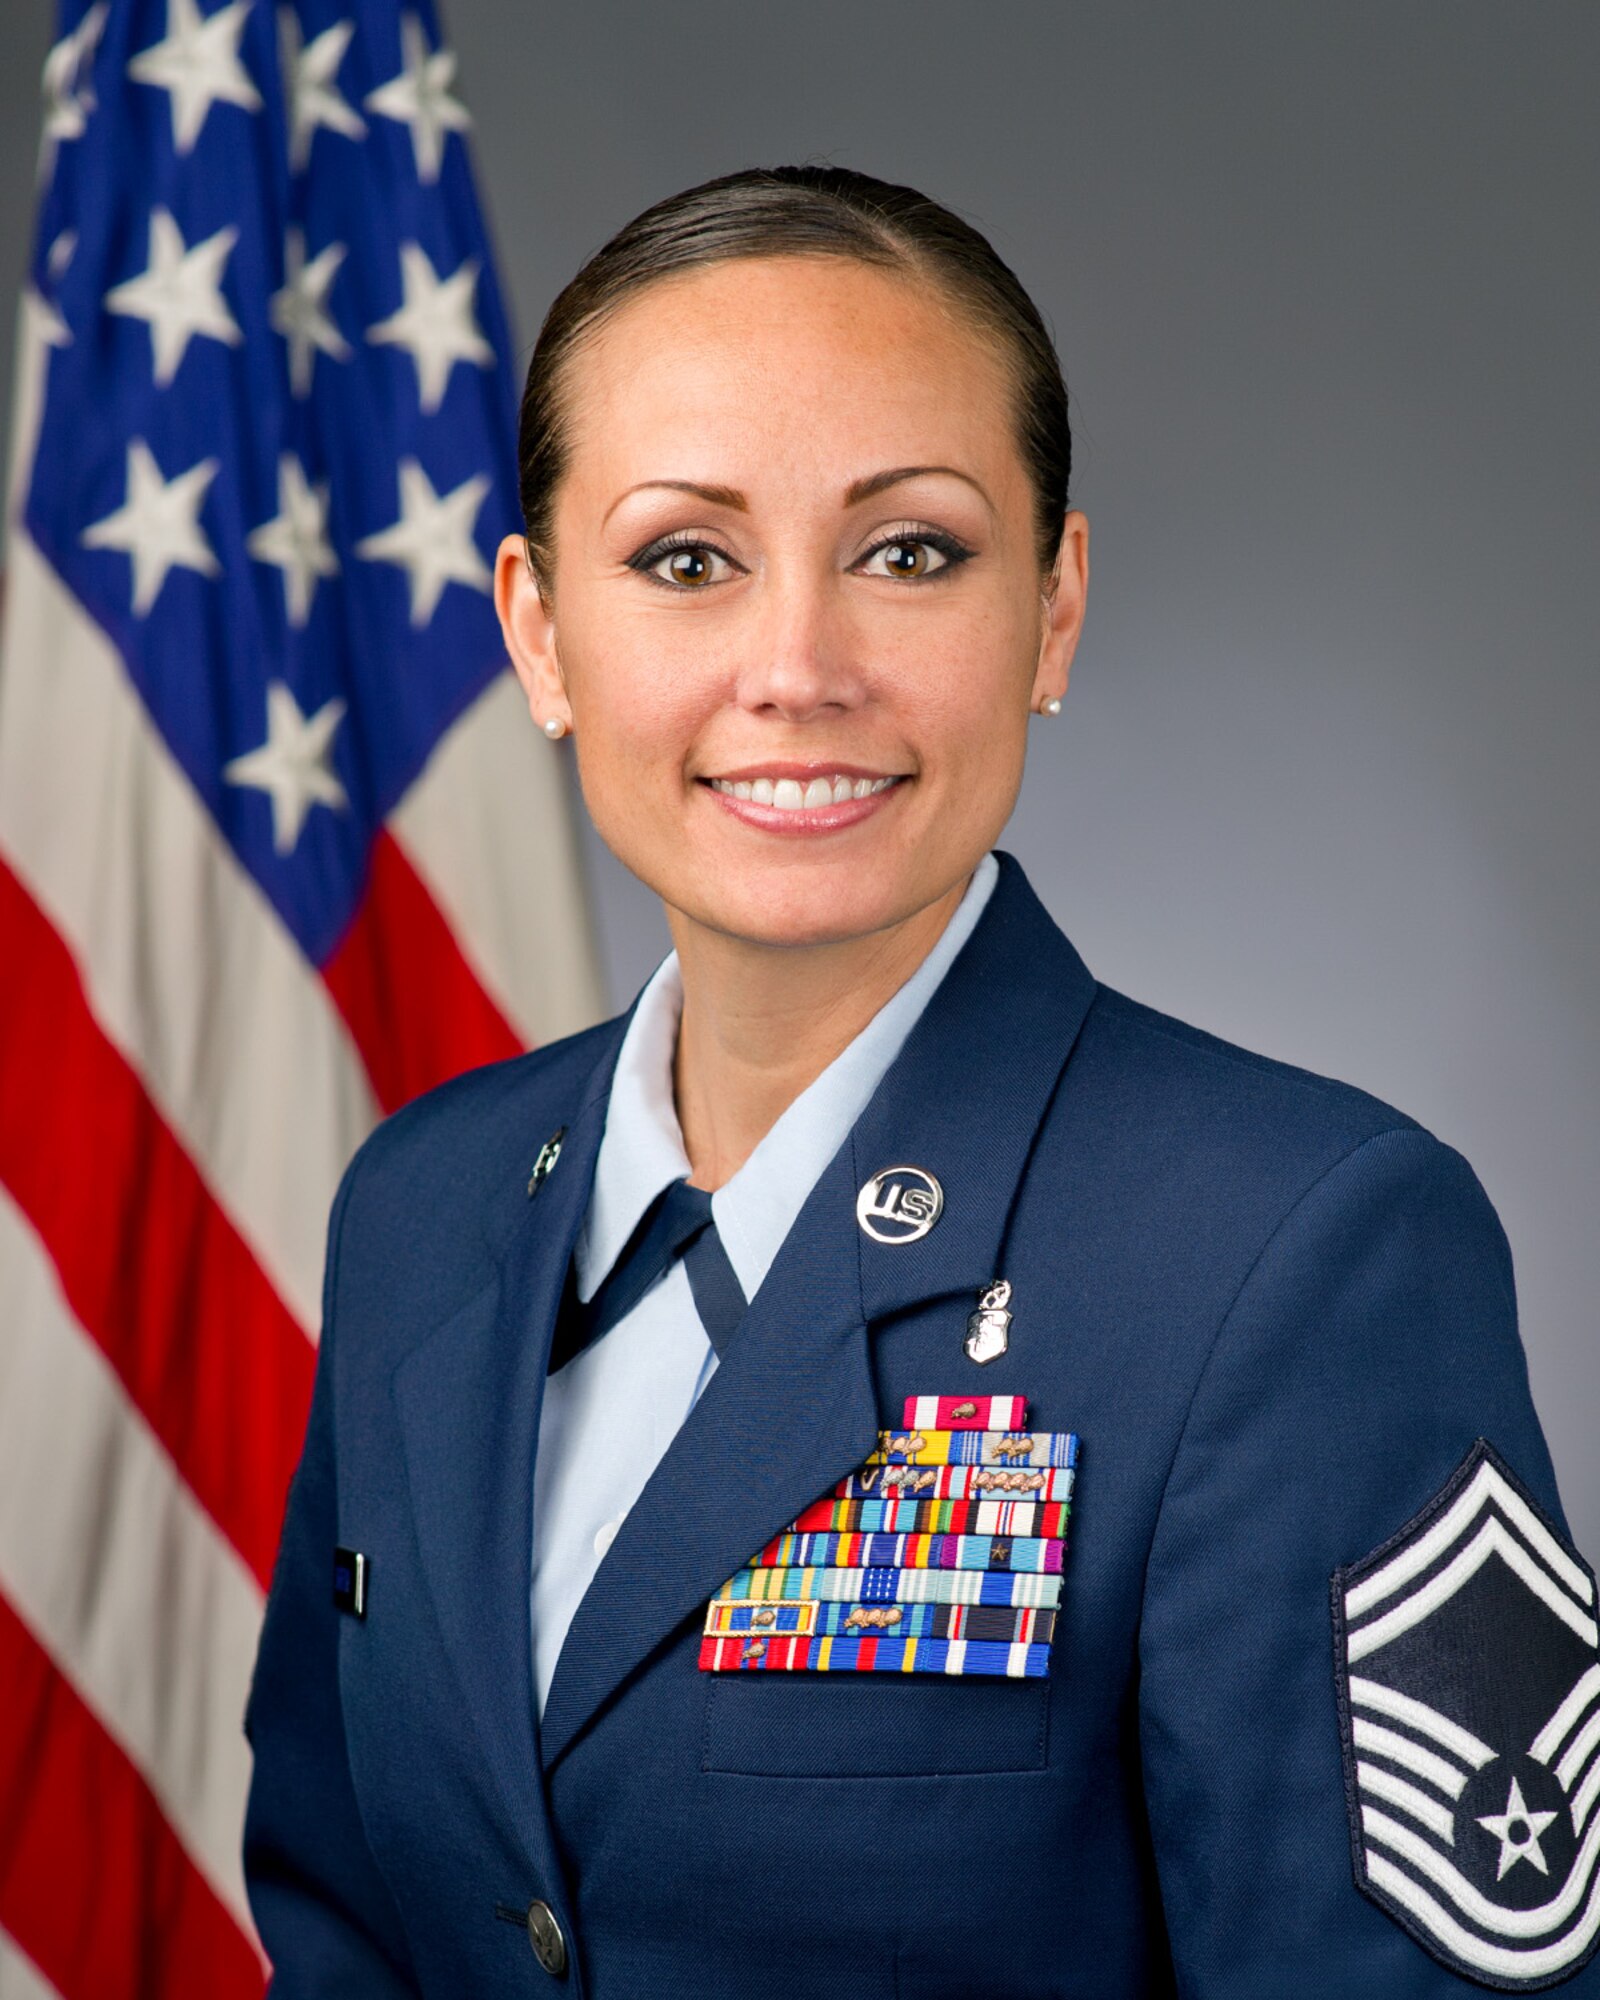 Commentary by Senior Master Sgt. Hope Skibitsky, 60th Force Support Squadron